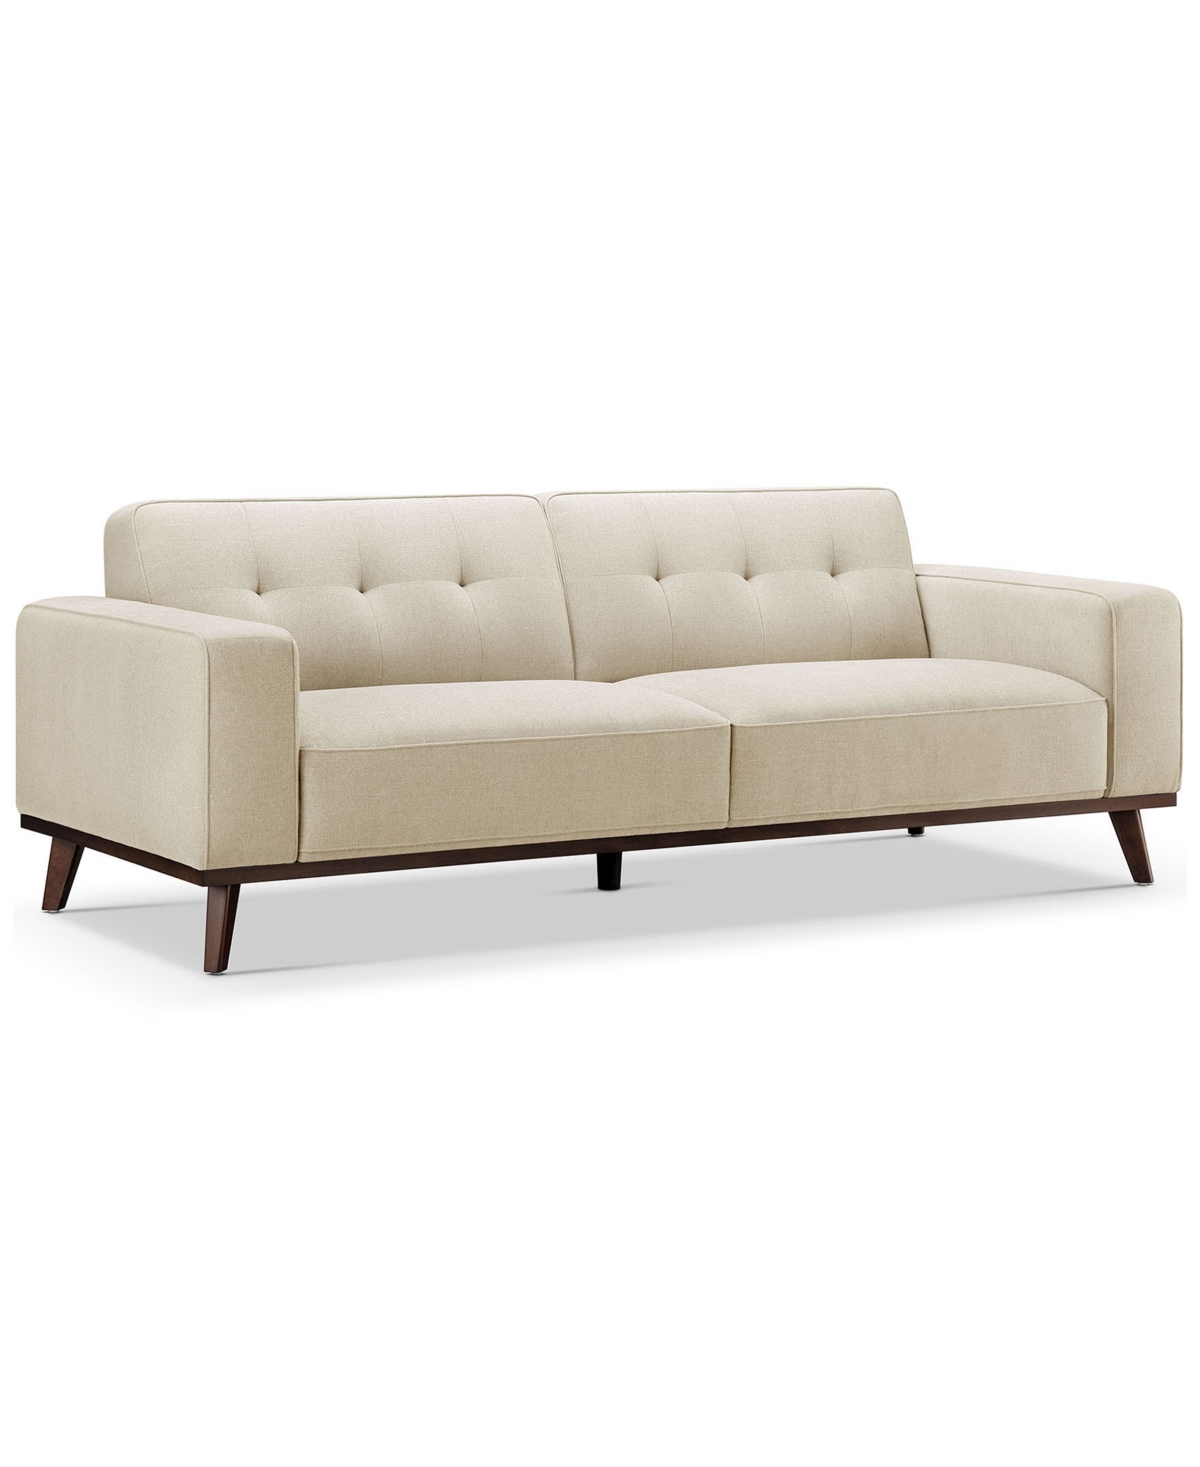 Abbyson Living Vicenza 84" Mid-century Upholstered Sofa In Beige